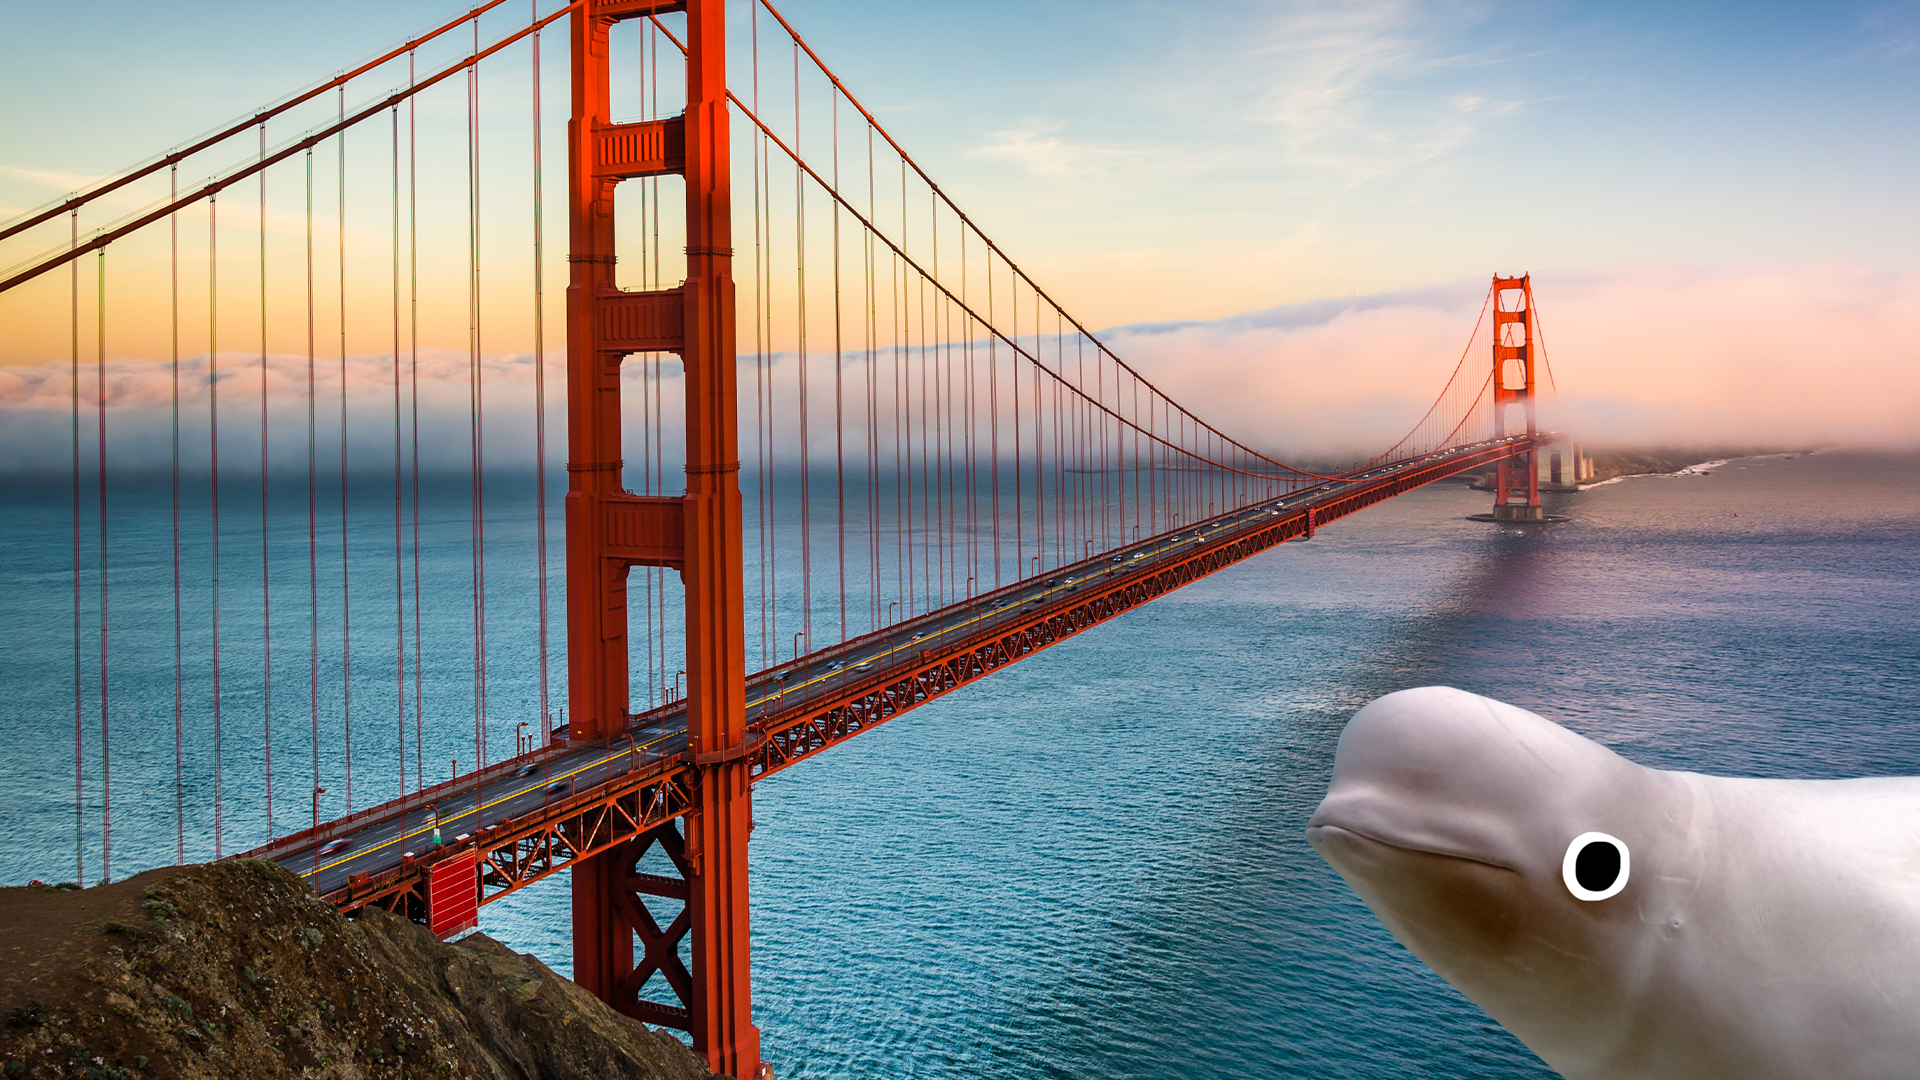 The Golden Gate Bridge and a beluga whale